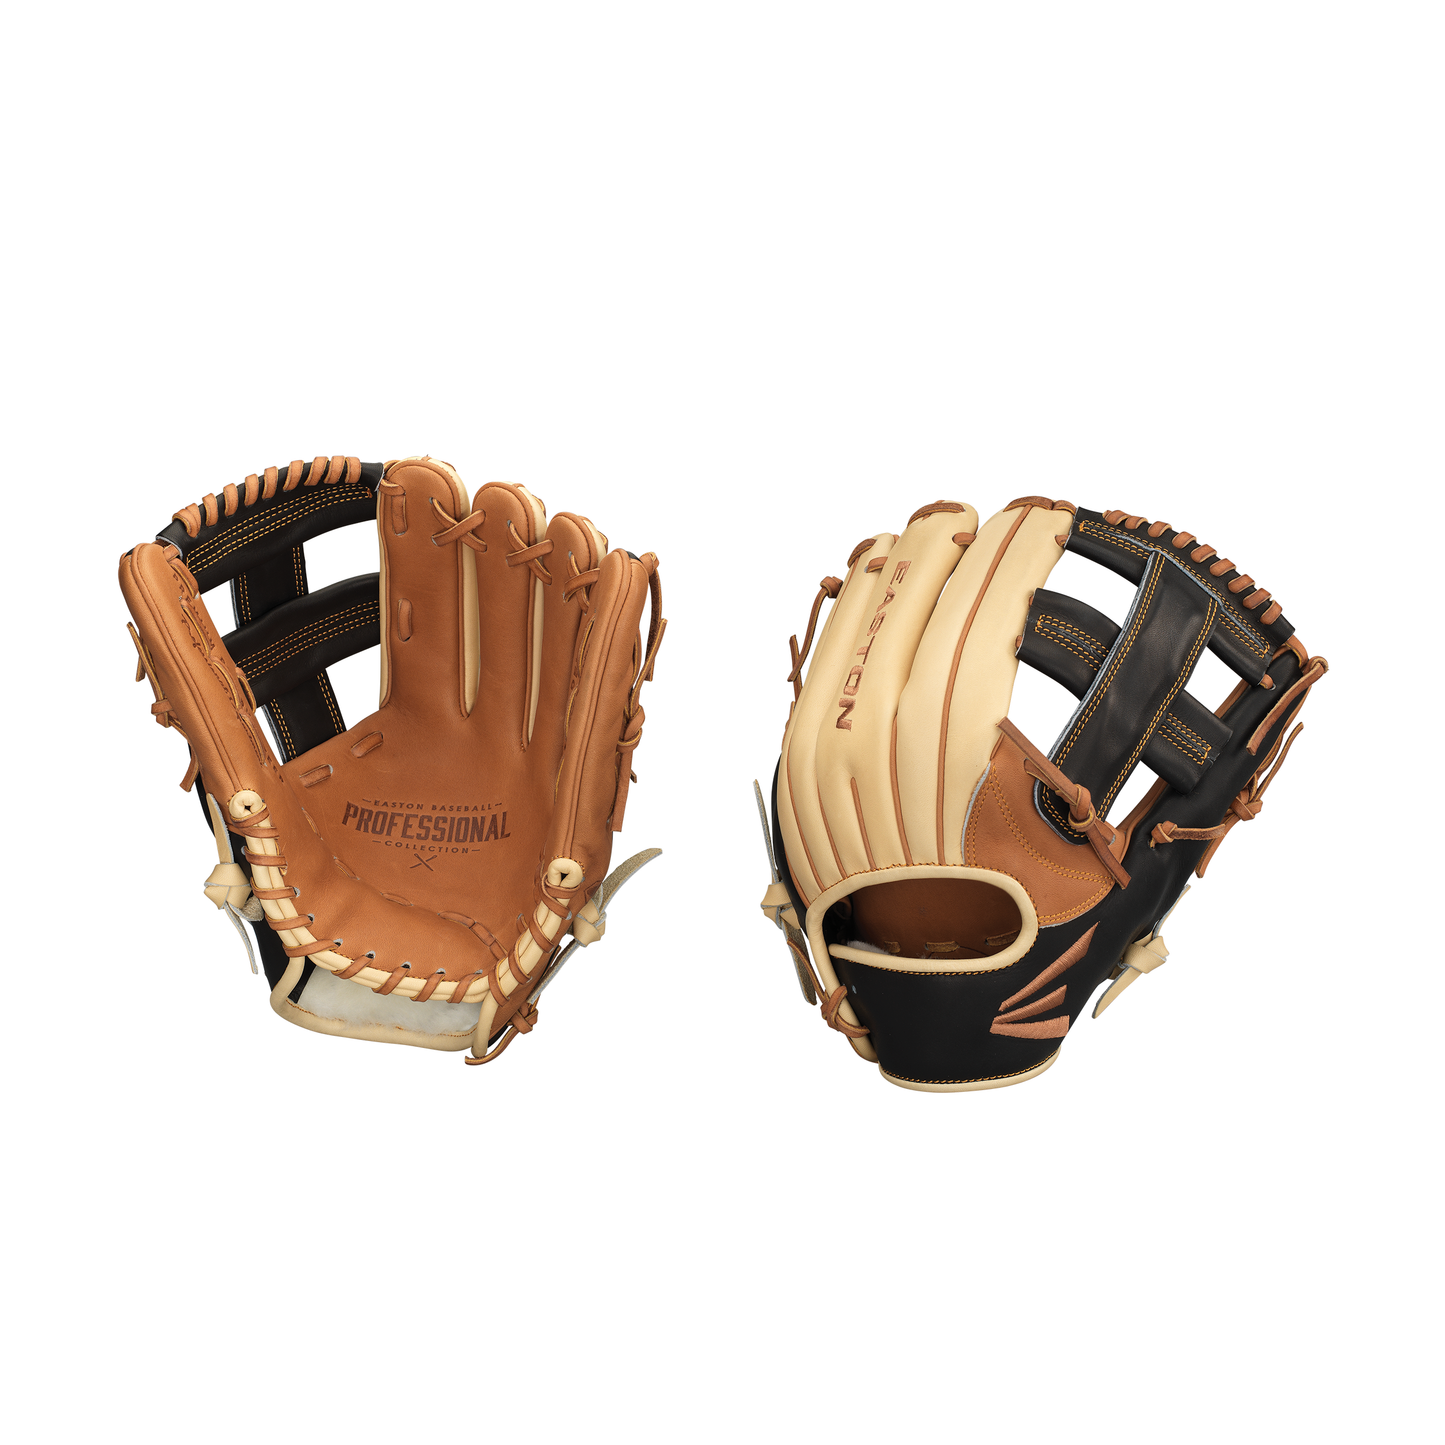 Easton Professional Collection Hybrid 11.75 inch Infield Glove PCH-C32